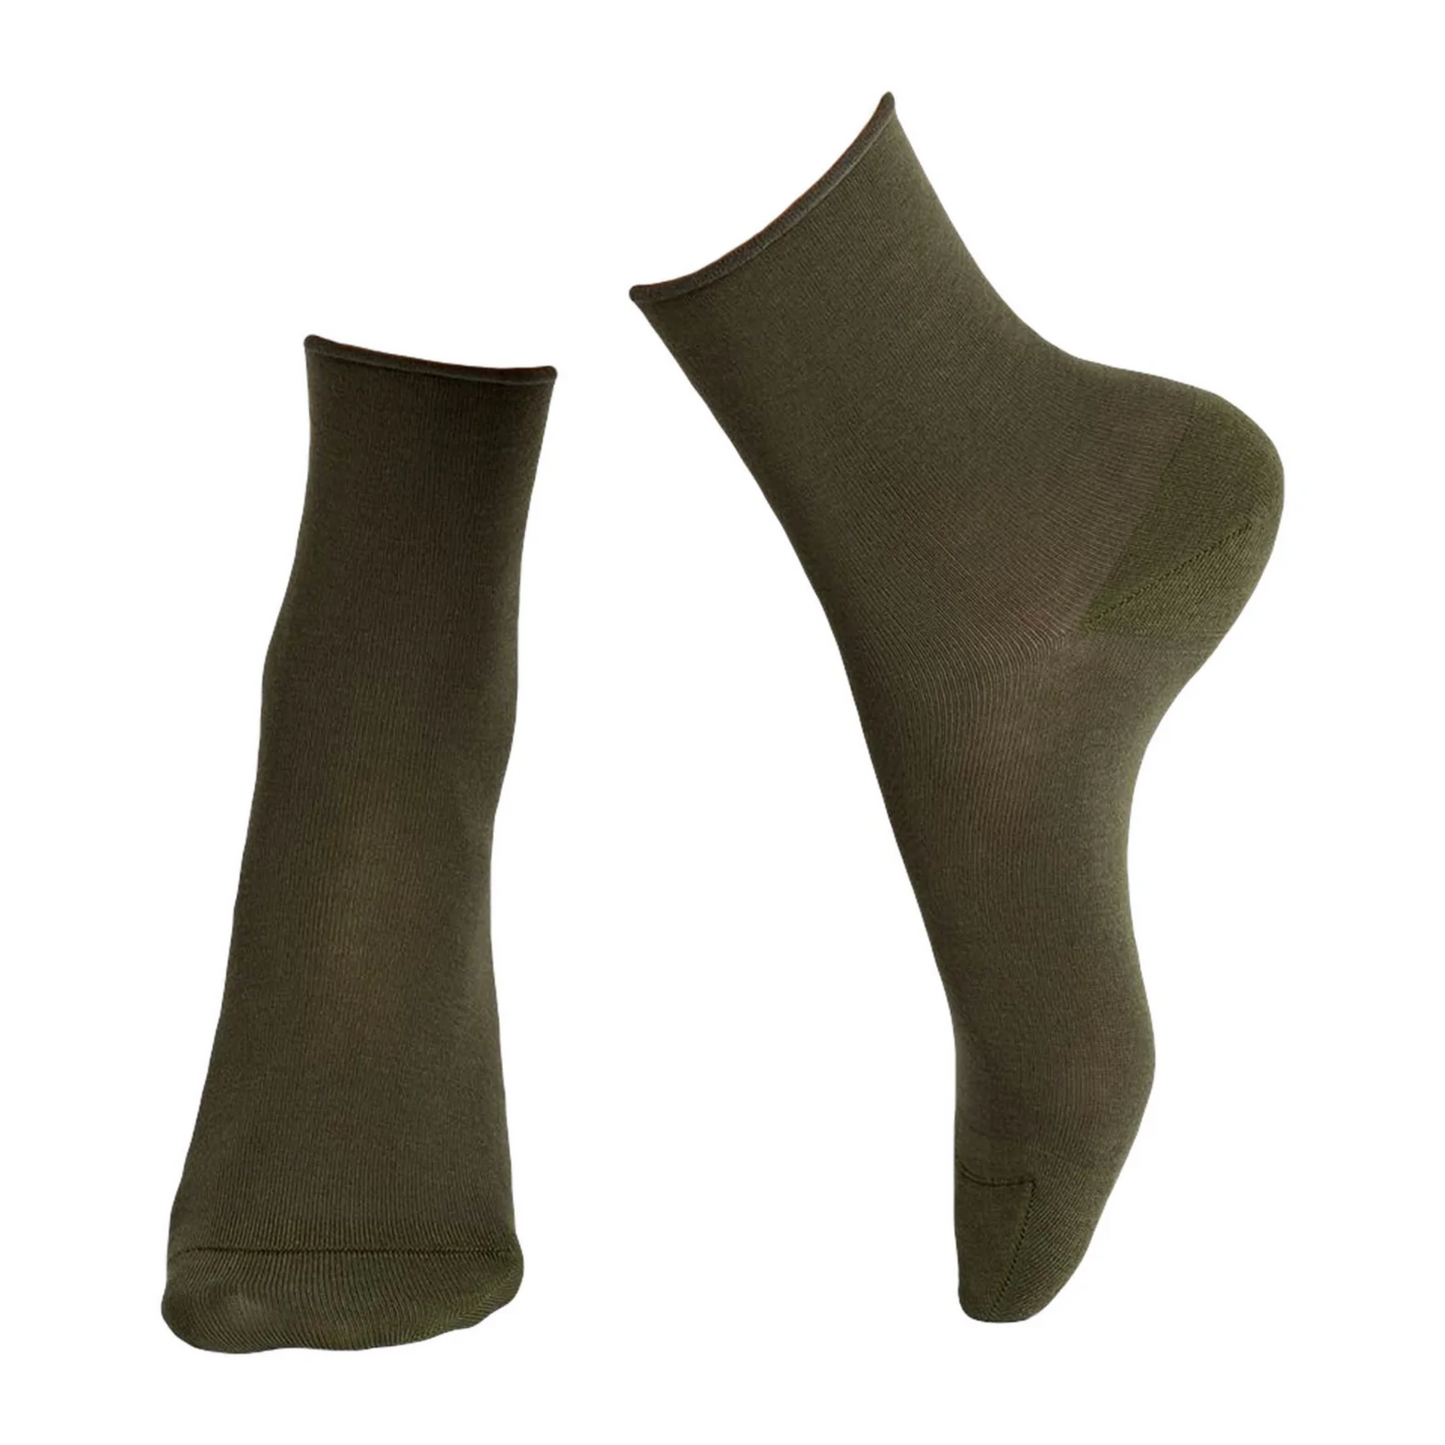 A plain dark earthy green sock with rolled cuff is pictured posed in profile.